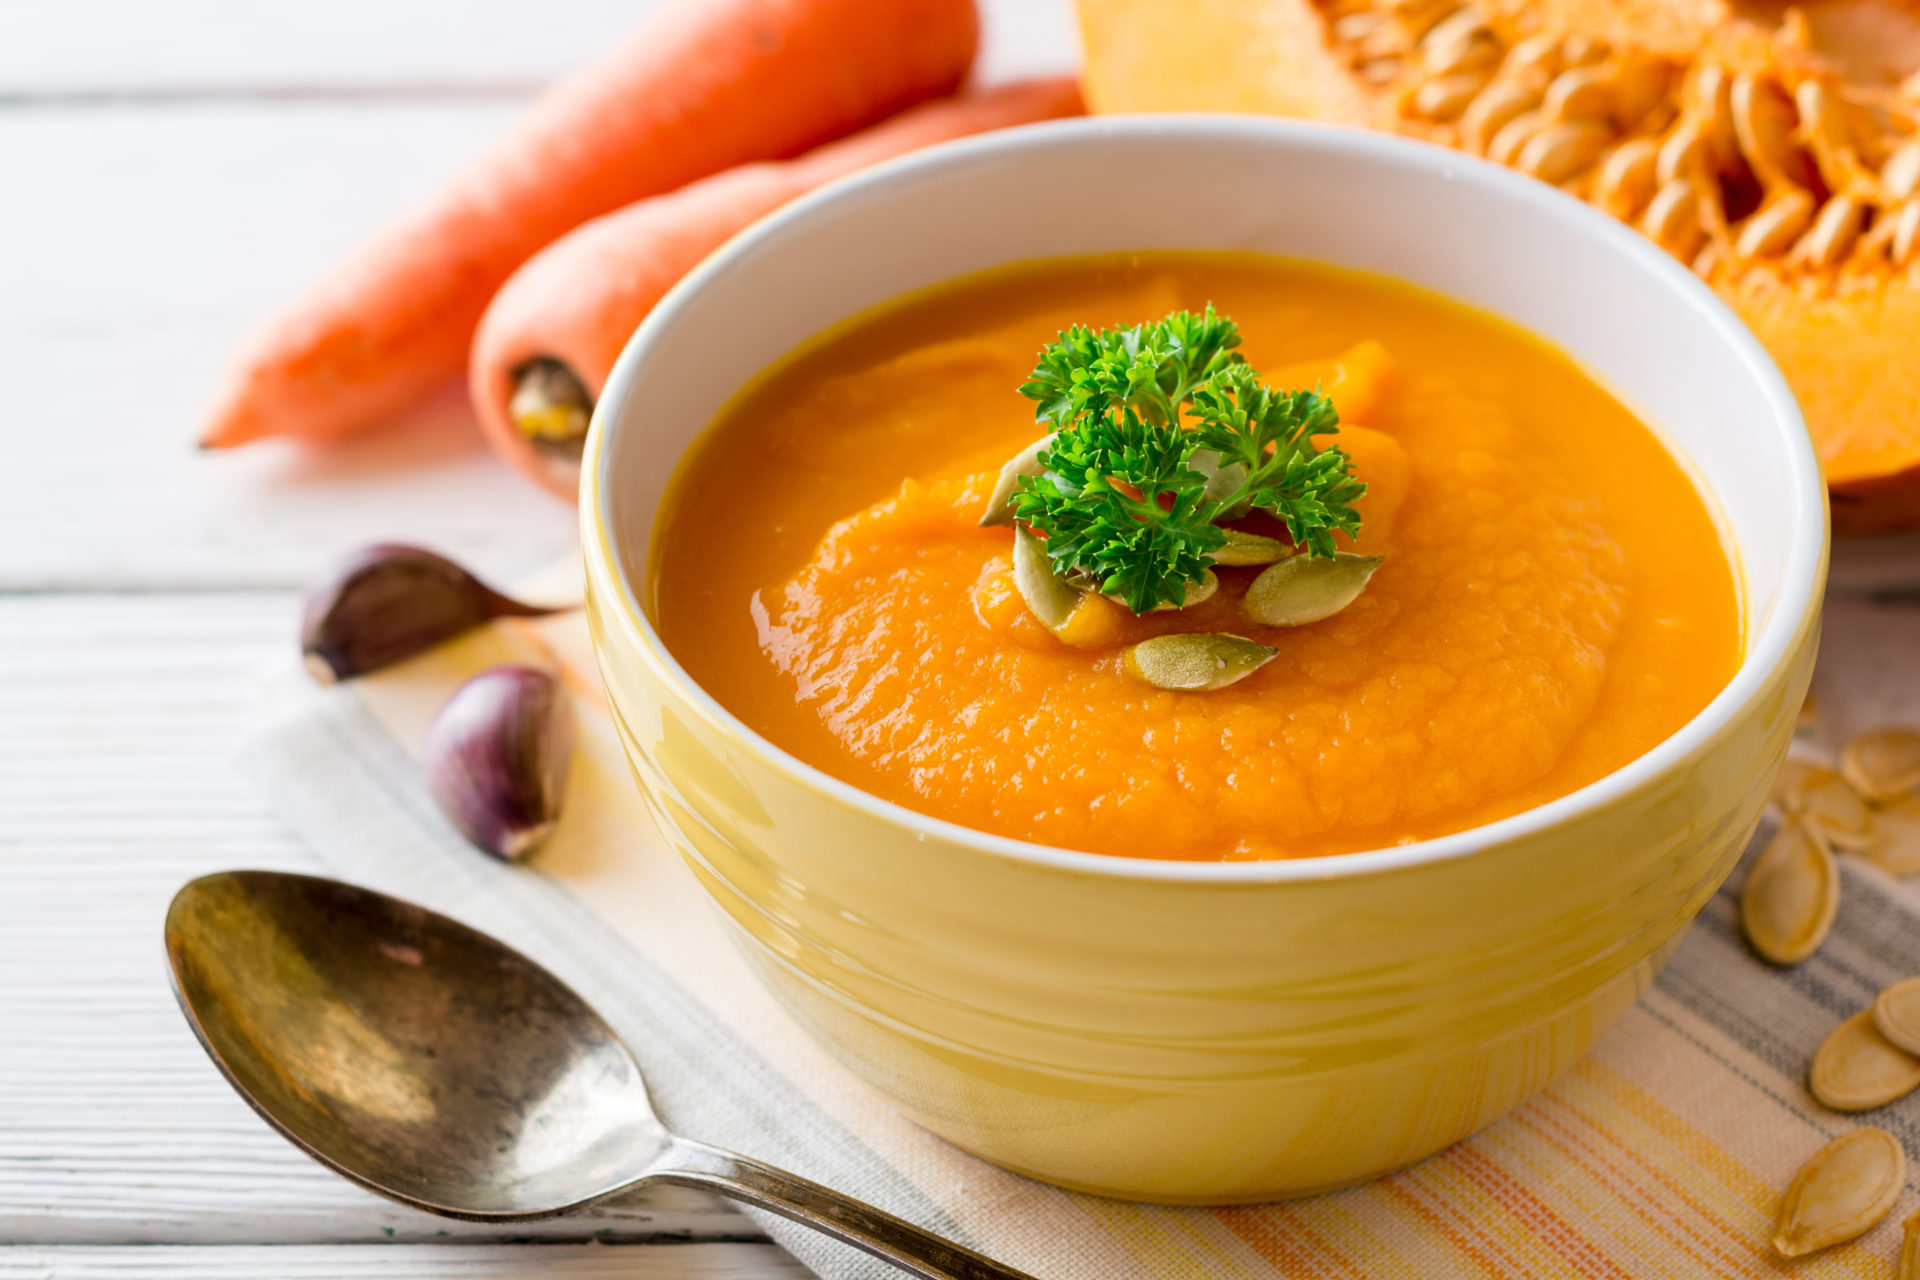 Pumpkin,And,Carrot,Cream,Soup,With,Pumpkin,Seeds,And,Parsley